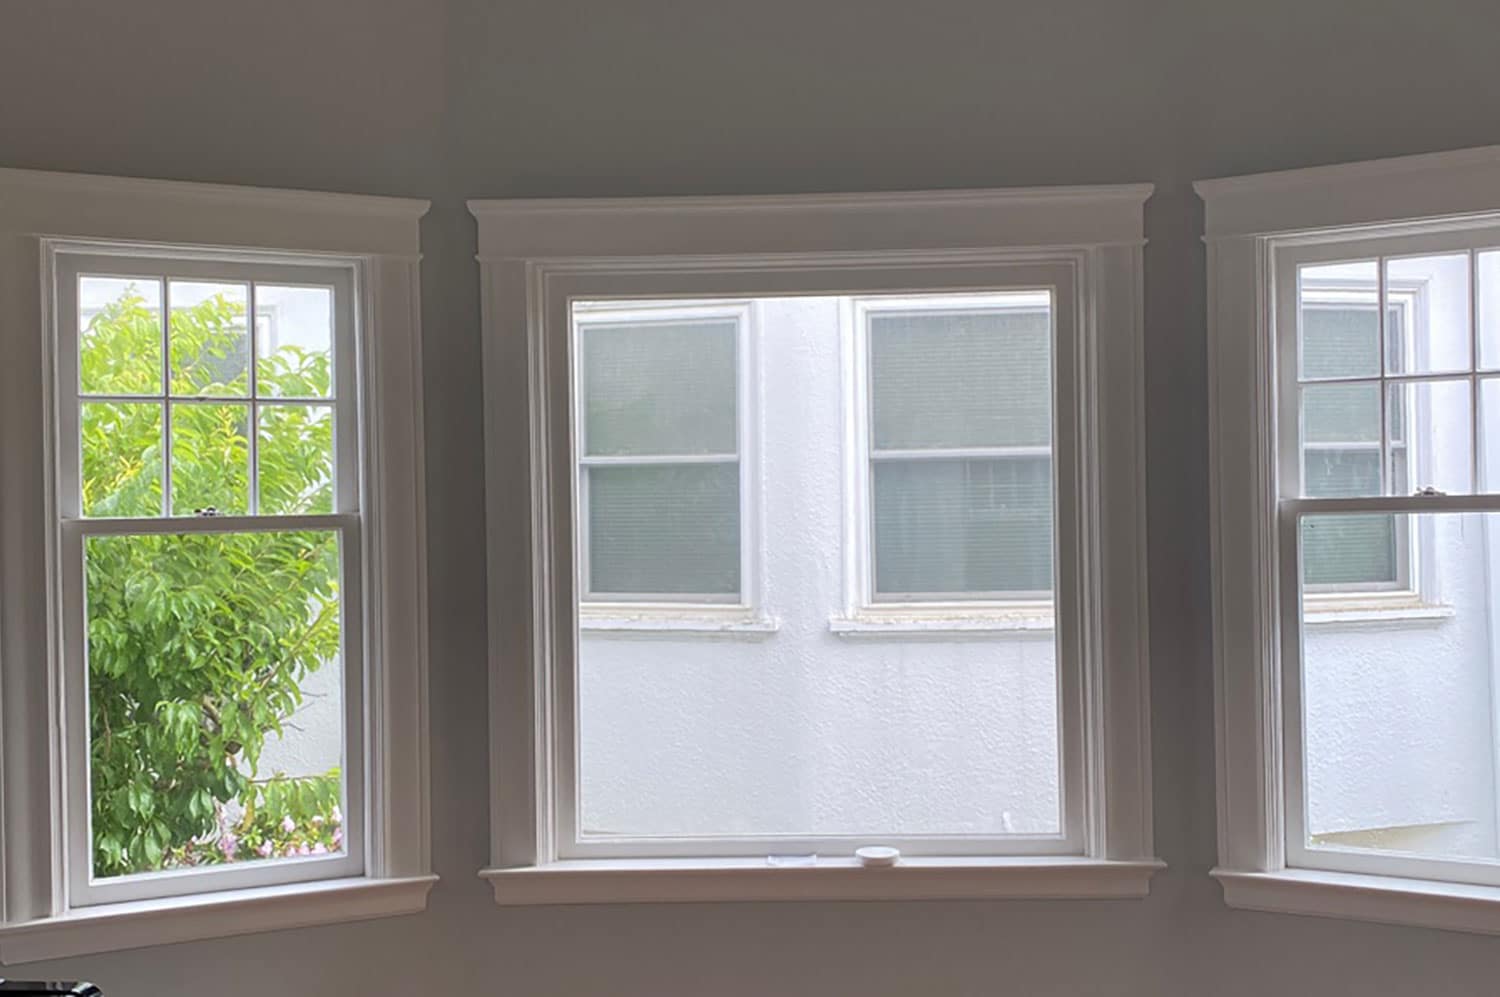 3M Safety Window Film is a great choice for San Francisco Bay Area homes. Installed by ClimatePro.